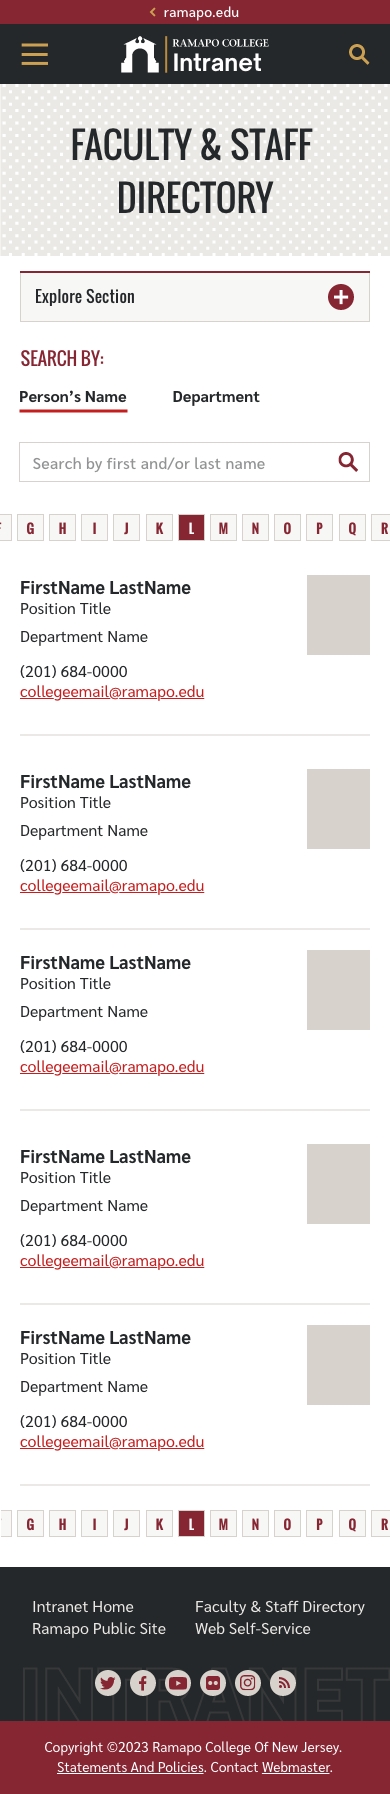 Faculty & Staff Contact Directory